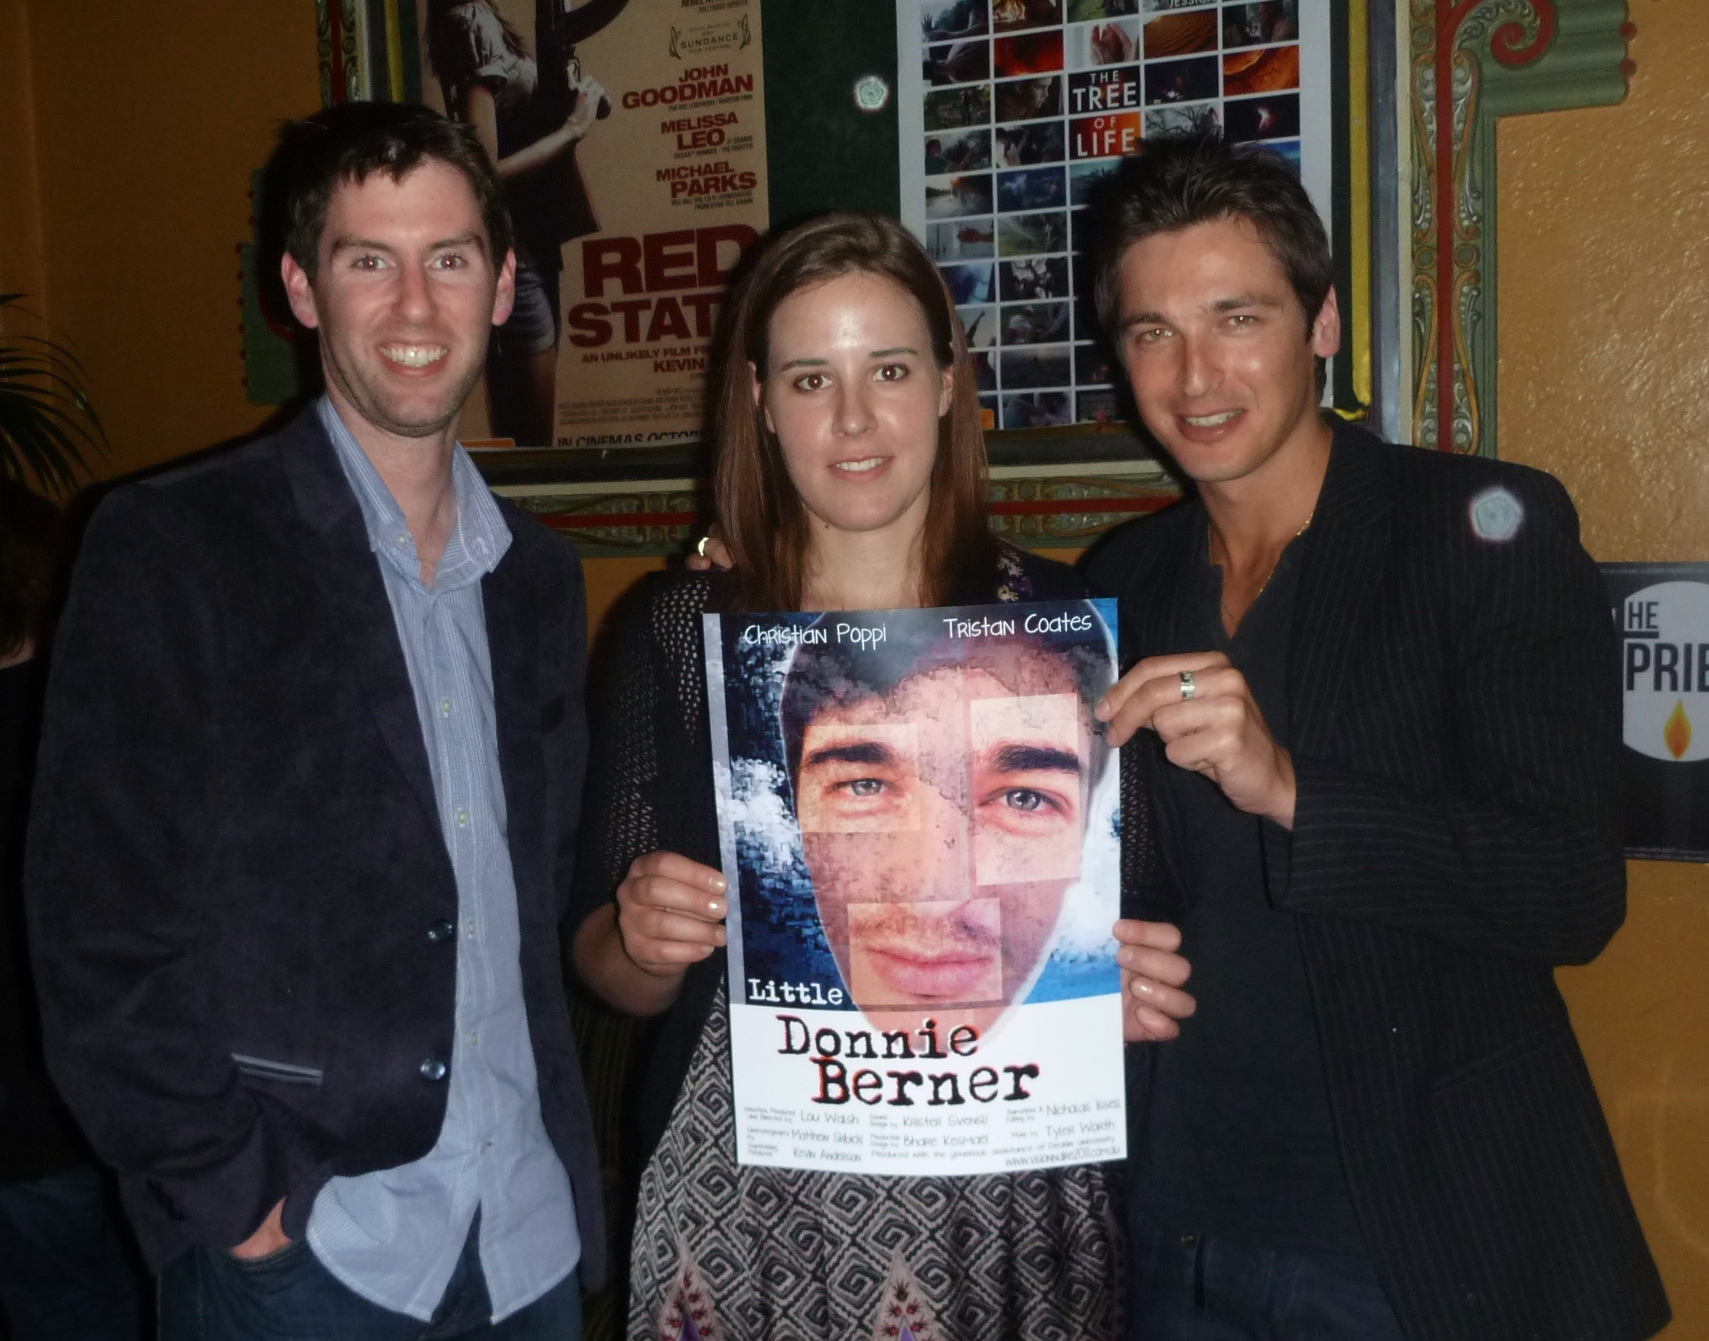 Christian Poppi with actor Tristan Coates and director Lou Walsh at the 2011 Visionarre Premier at the Astor Theatre